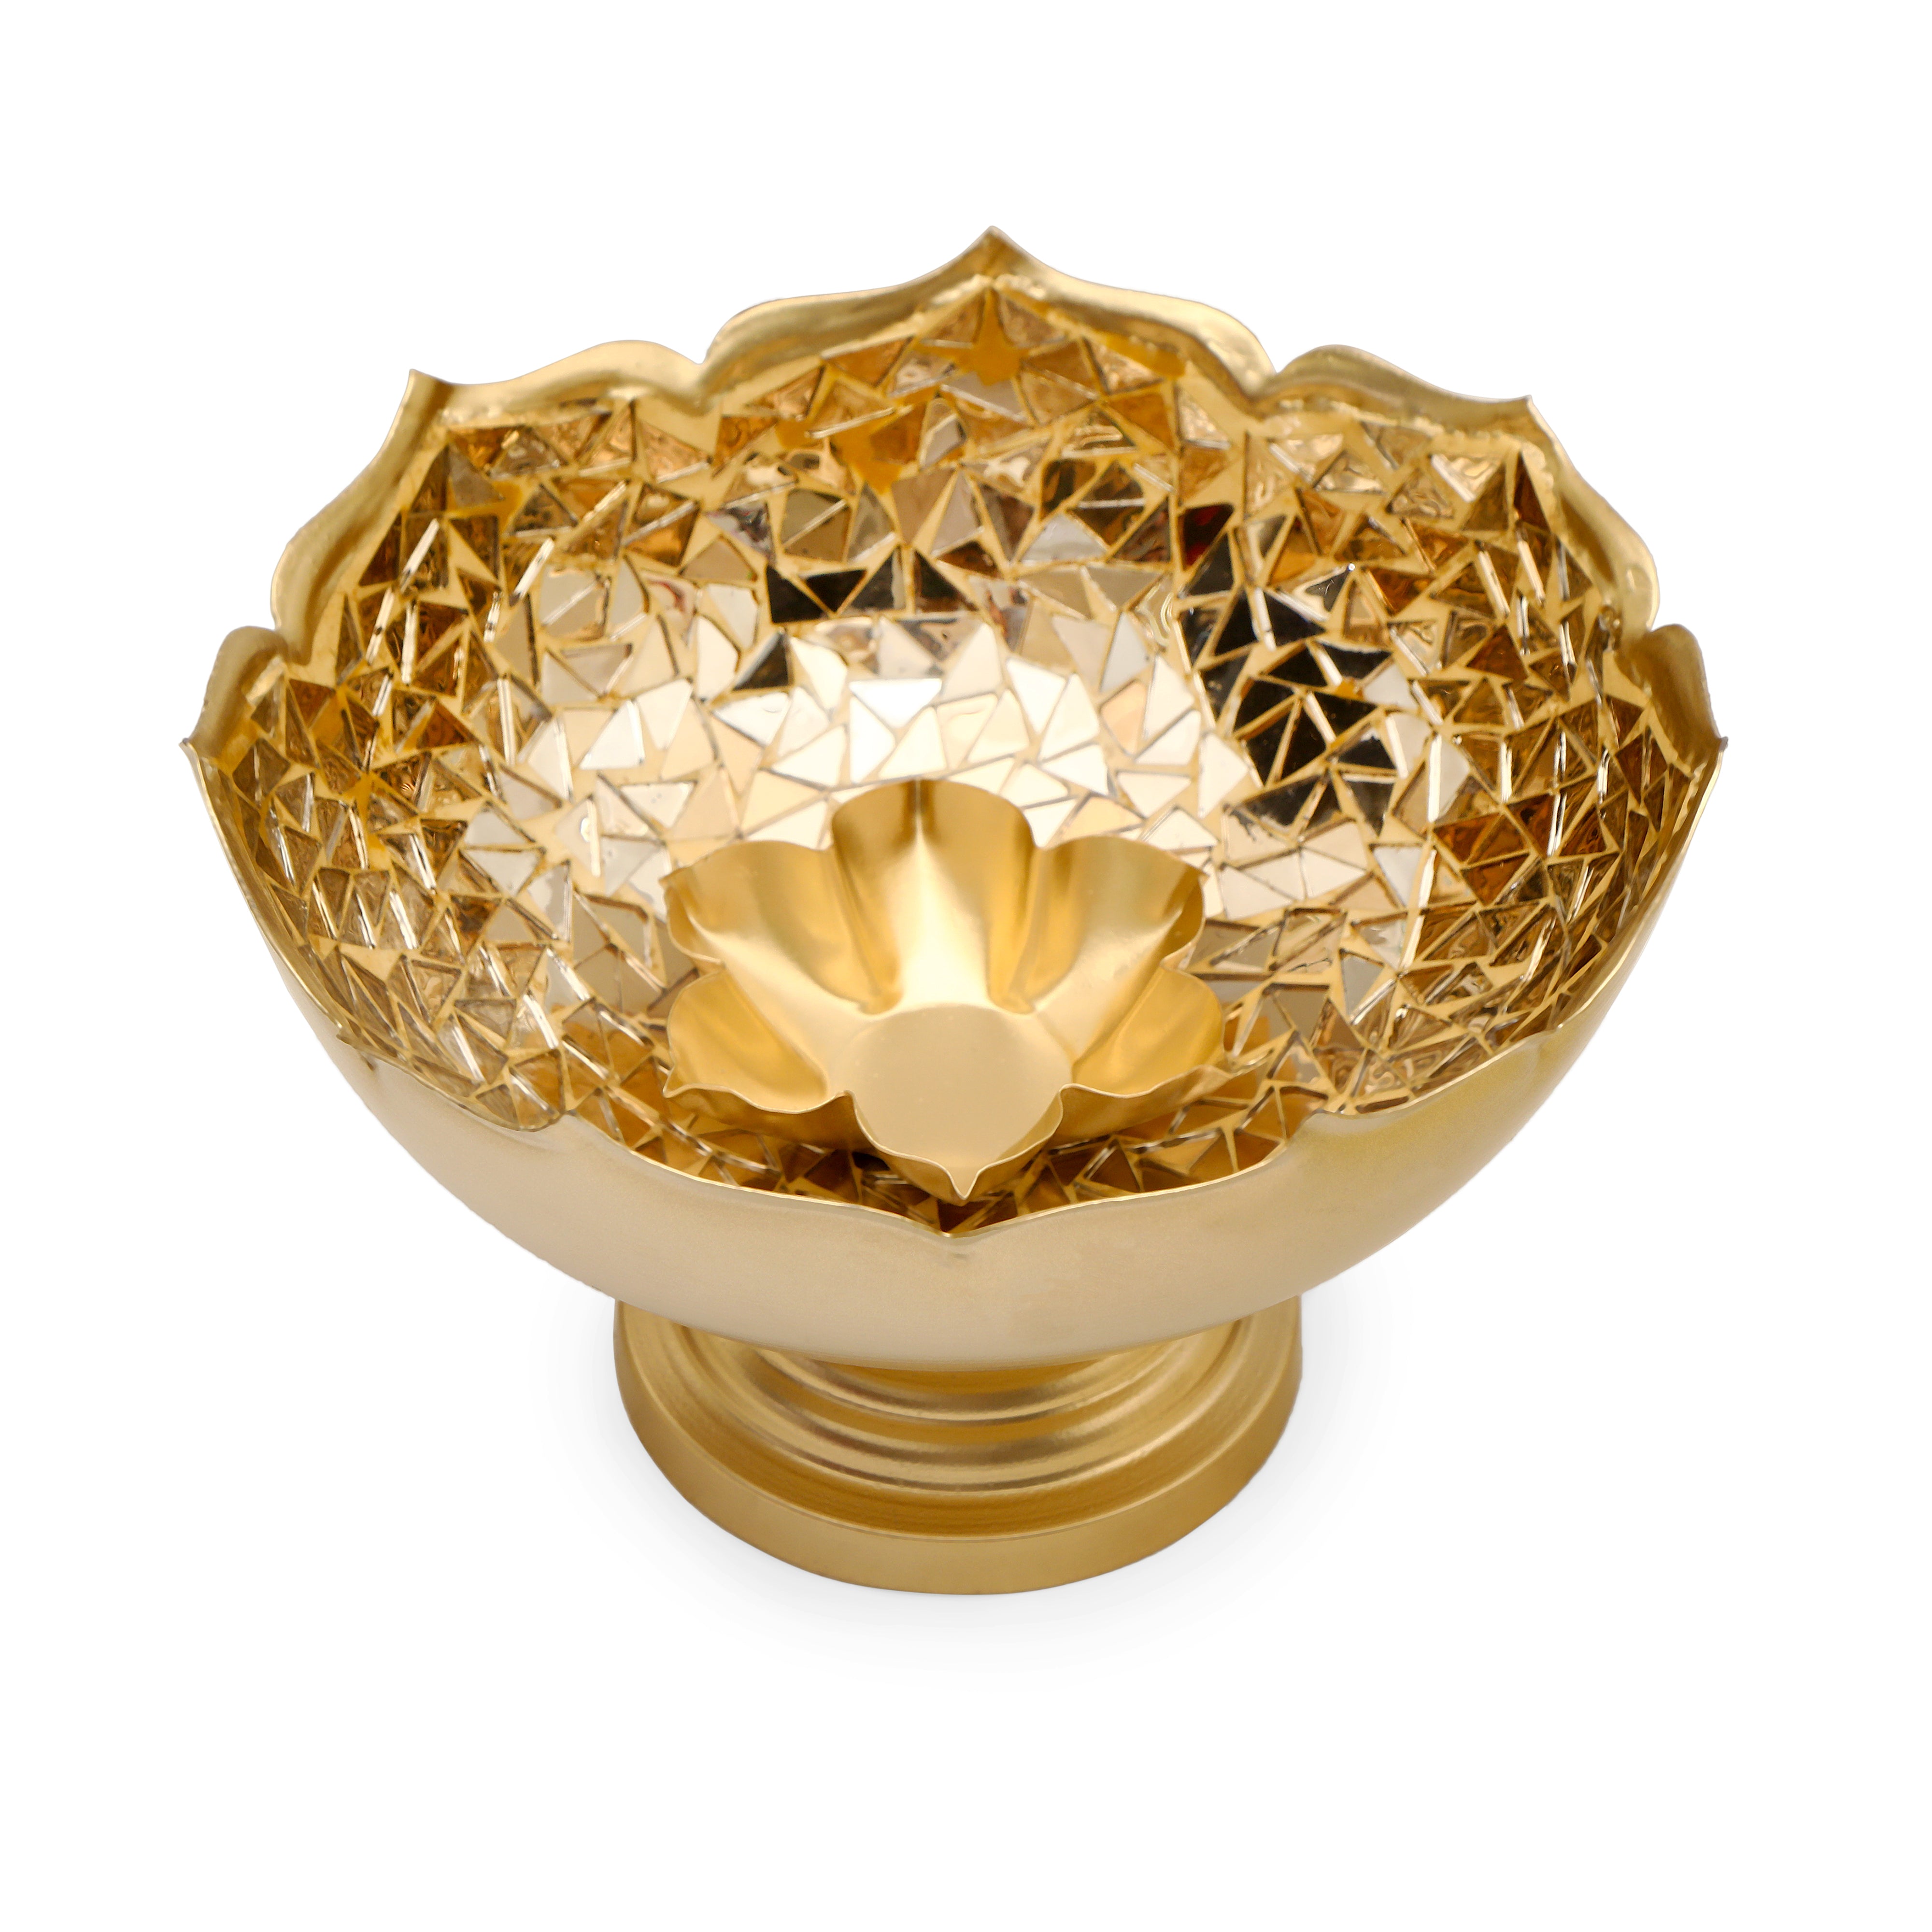 Gold Mosaic Urli with Stand 8.5" Inch (Small) 3- The Home Co.